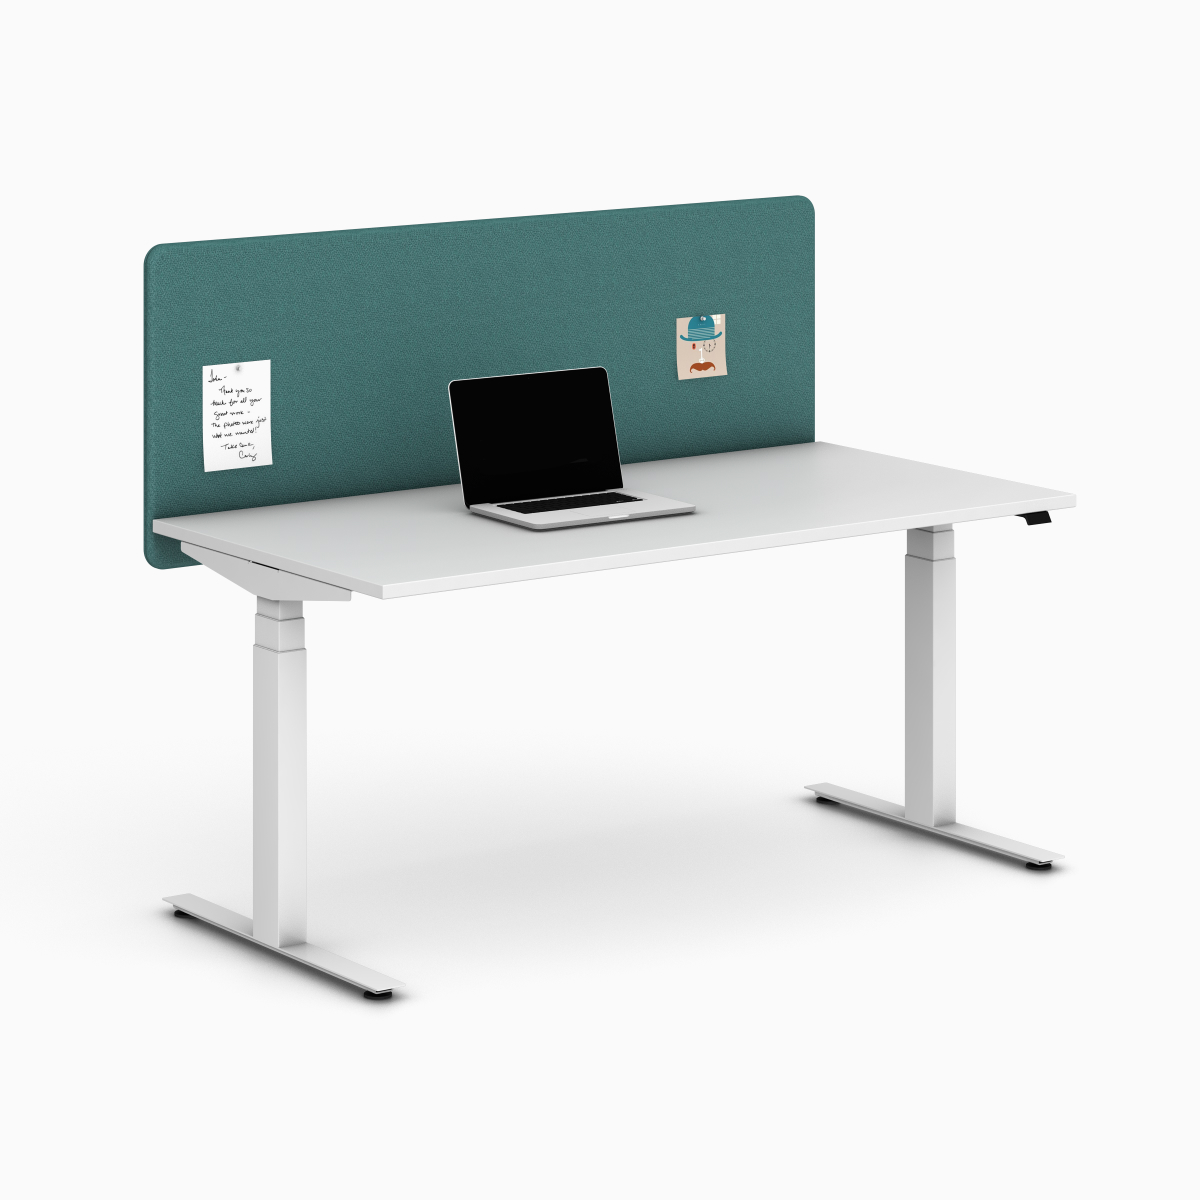 A detailed view of the base of a Nevi Sit-Stand Desk.